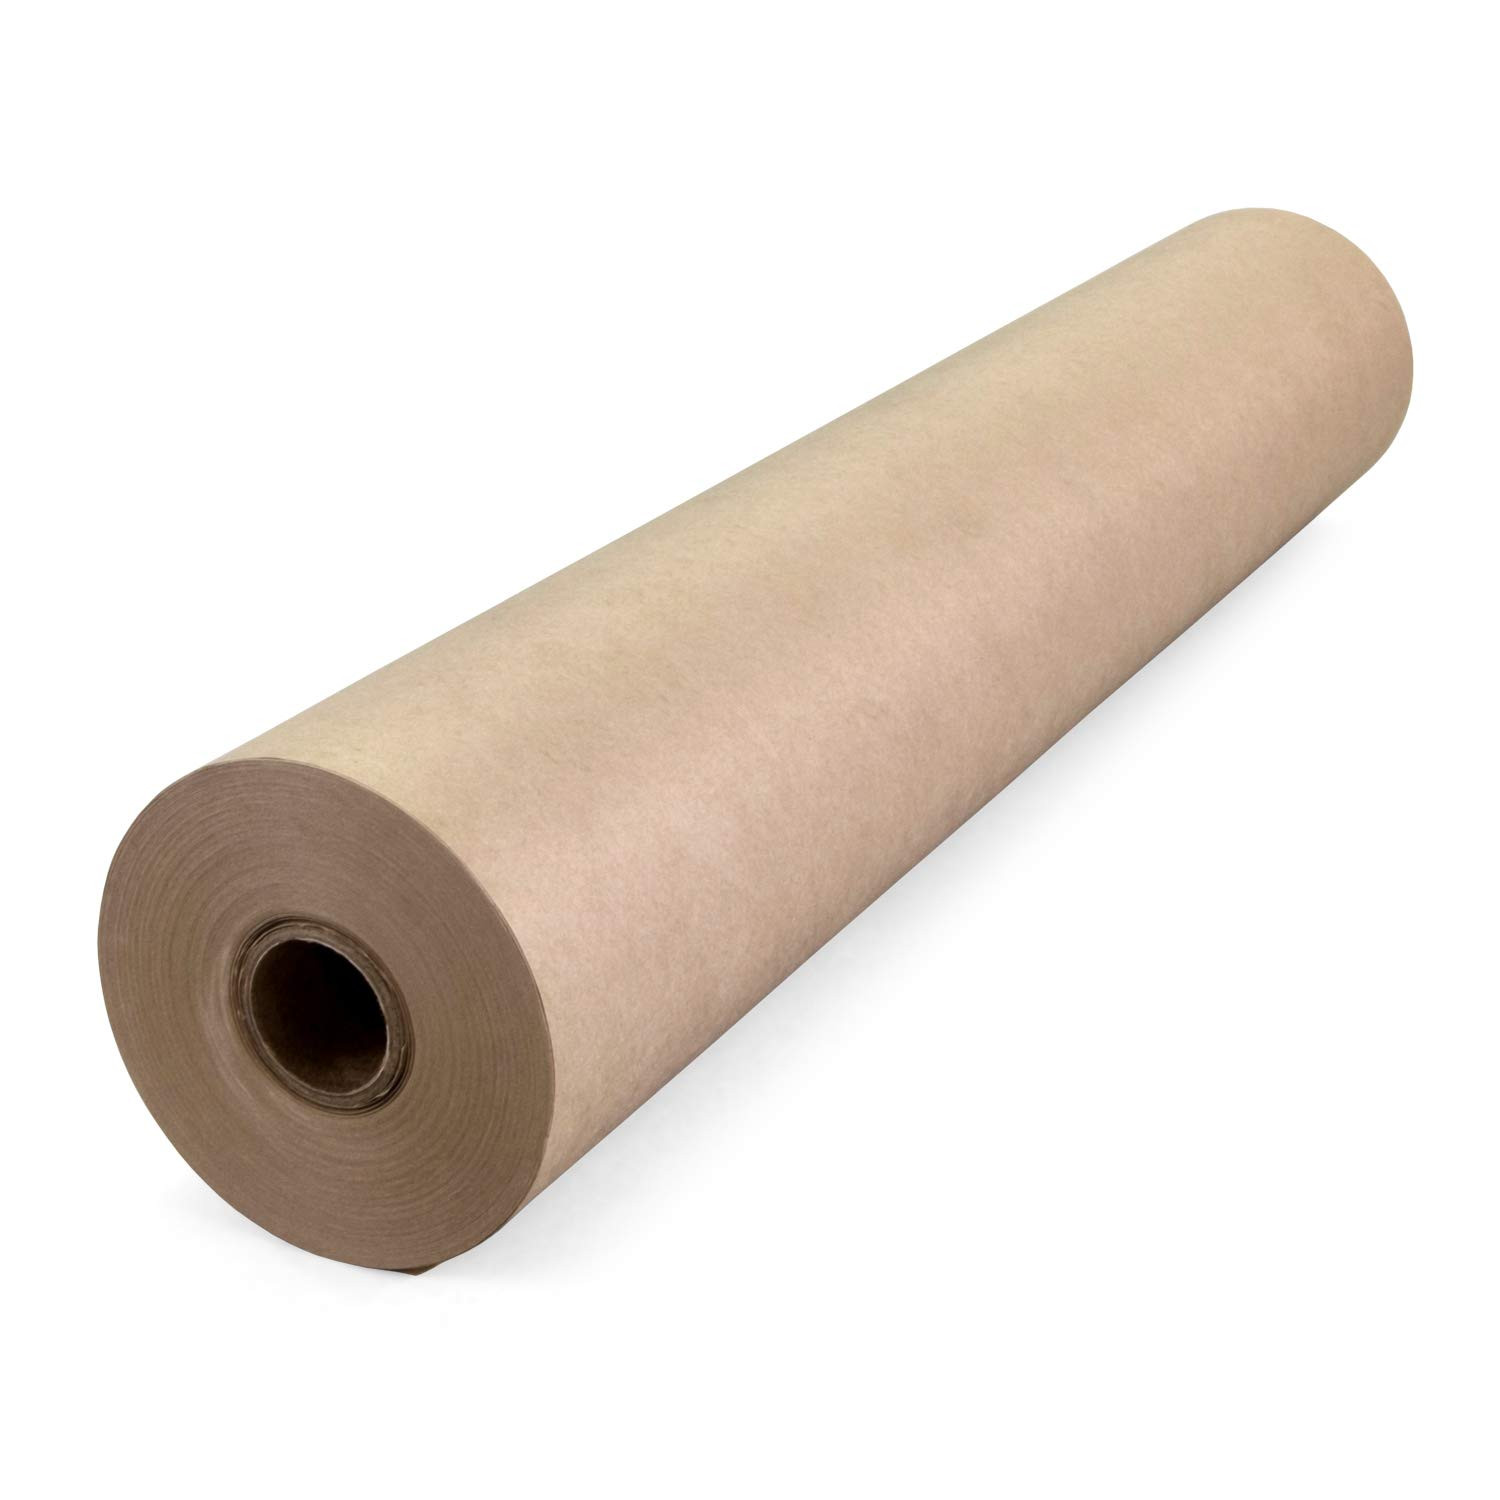 100 Sheets Kraft Tissue Paper - 14 x 20 Inches Recyclable Brown